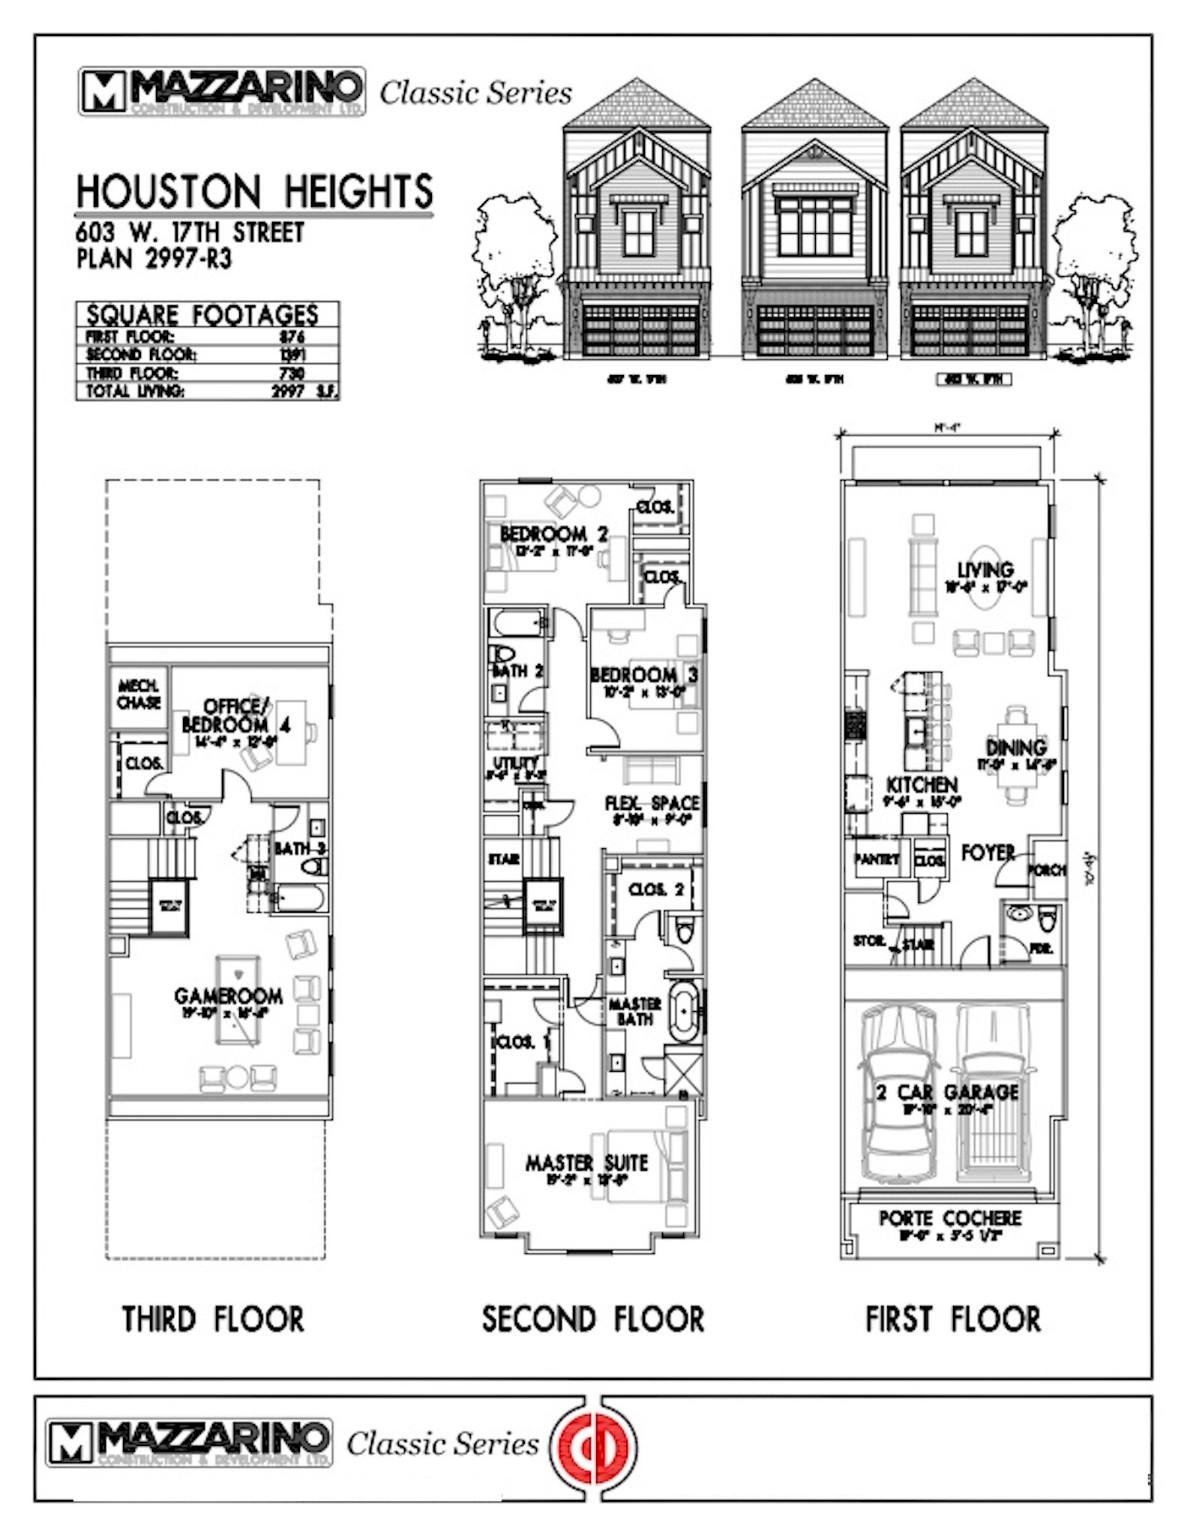 Please be aware that these plans are the property of the architect/builder designer that designed them not DUX Realty, Mazzarino Construction or 603 W 17TH LLC and are protected from reproduction and sharing under copyright law. These drawing are for general information only. Measurements, square footages and features are for illustrative marketing purposes. All information should be independently verified. Plans are subject to change without notification. - If you have additional questions regarding 603 W 17TH Street  in Houston or would like to tour the property with us call 800-660-1022 and reference MLS# 50260912.